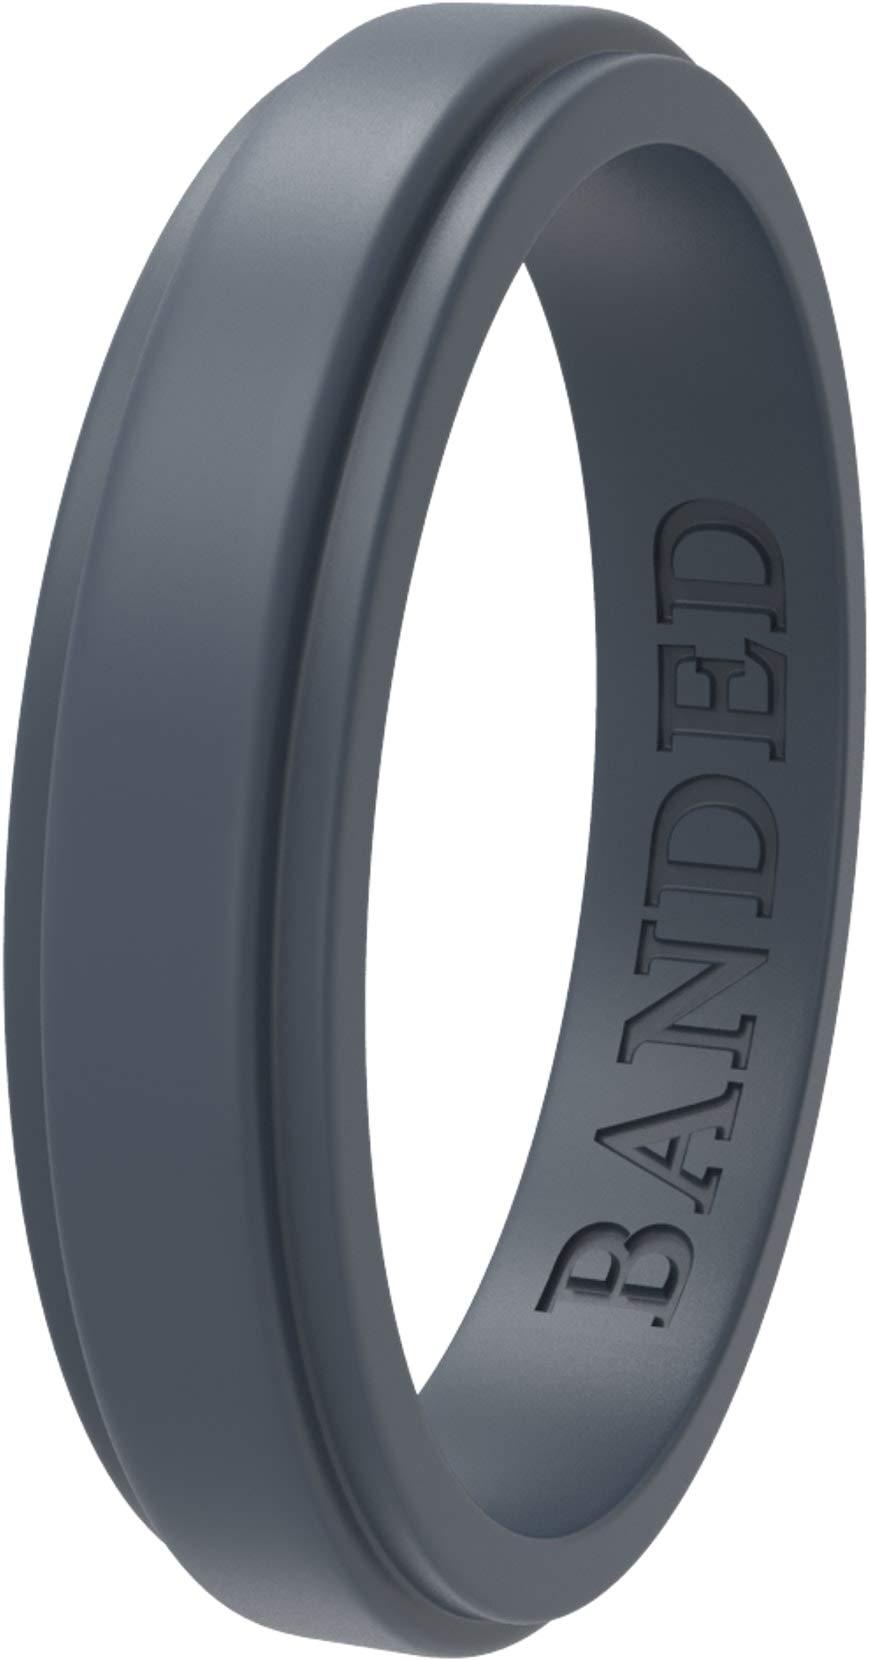 [Australia] - BANDED GLORY Silicone Wedding Ring for Men, Silicone Ring Rubber Wedding Bands Thin Gray 4 